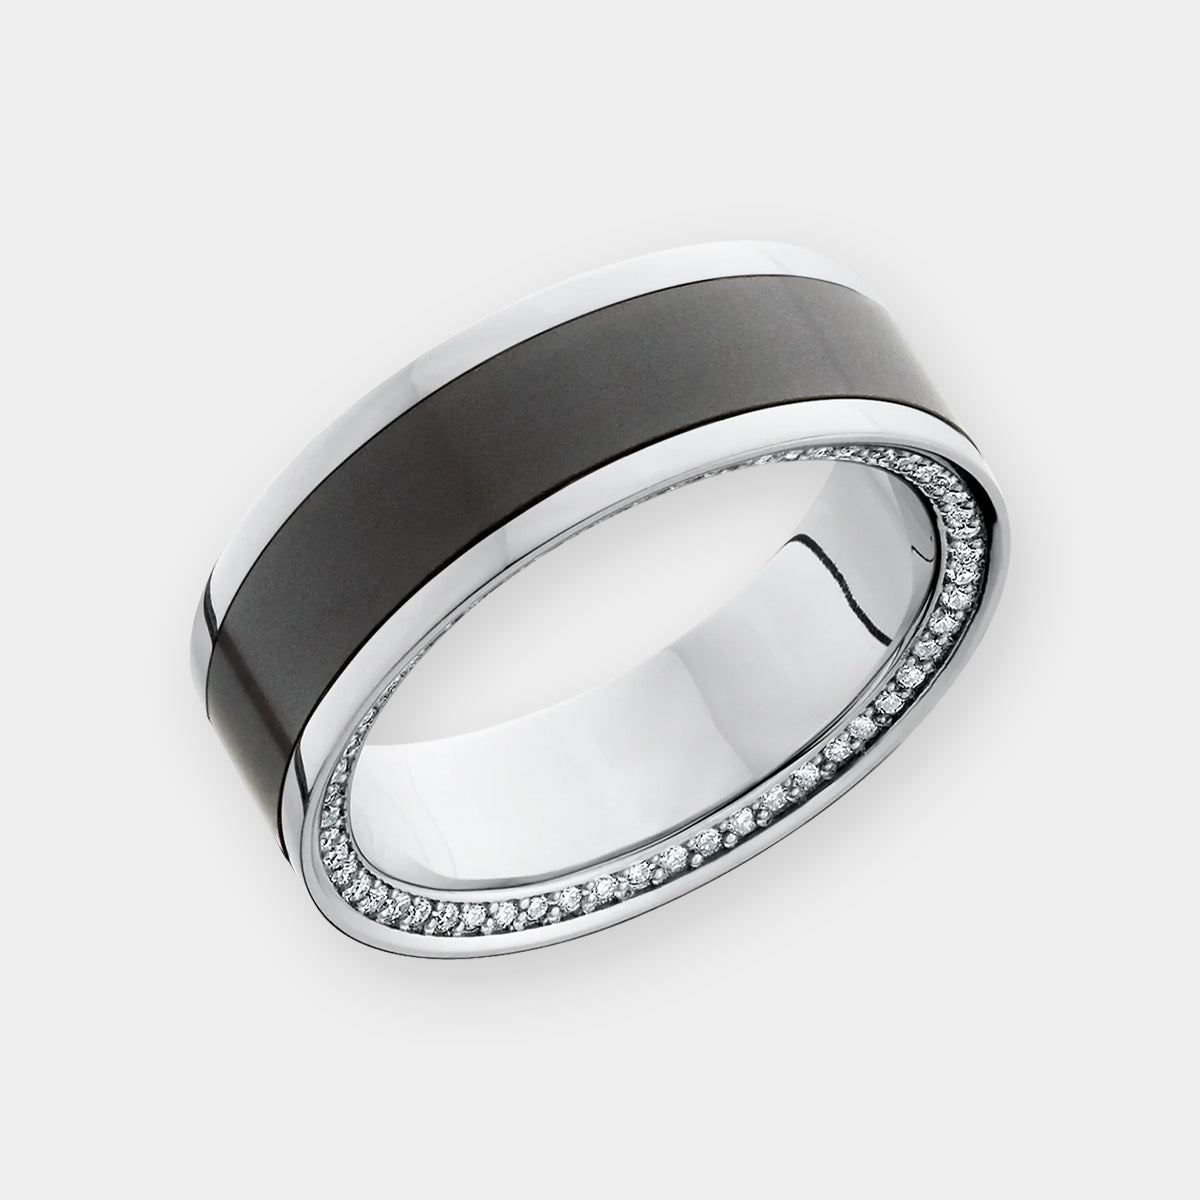 Solid Black Diamond Inlay Ring with a Platinum Band & Approximately 120 White Diamonds Inset on a Reverse Bevel | Elysium Black Diamond Ring - Zeus 8mm | Products | Image 1